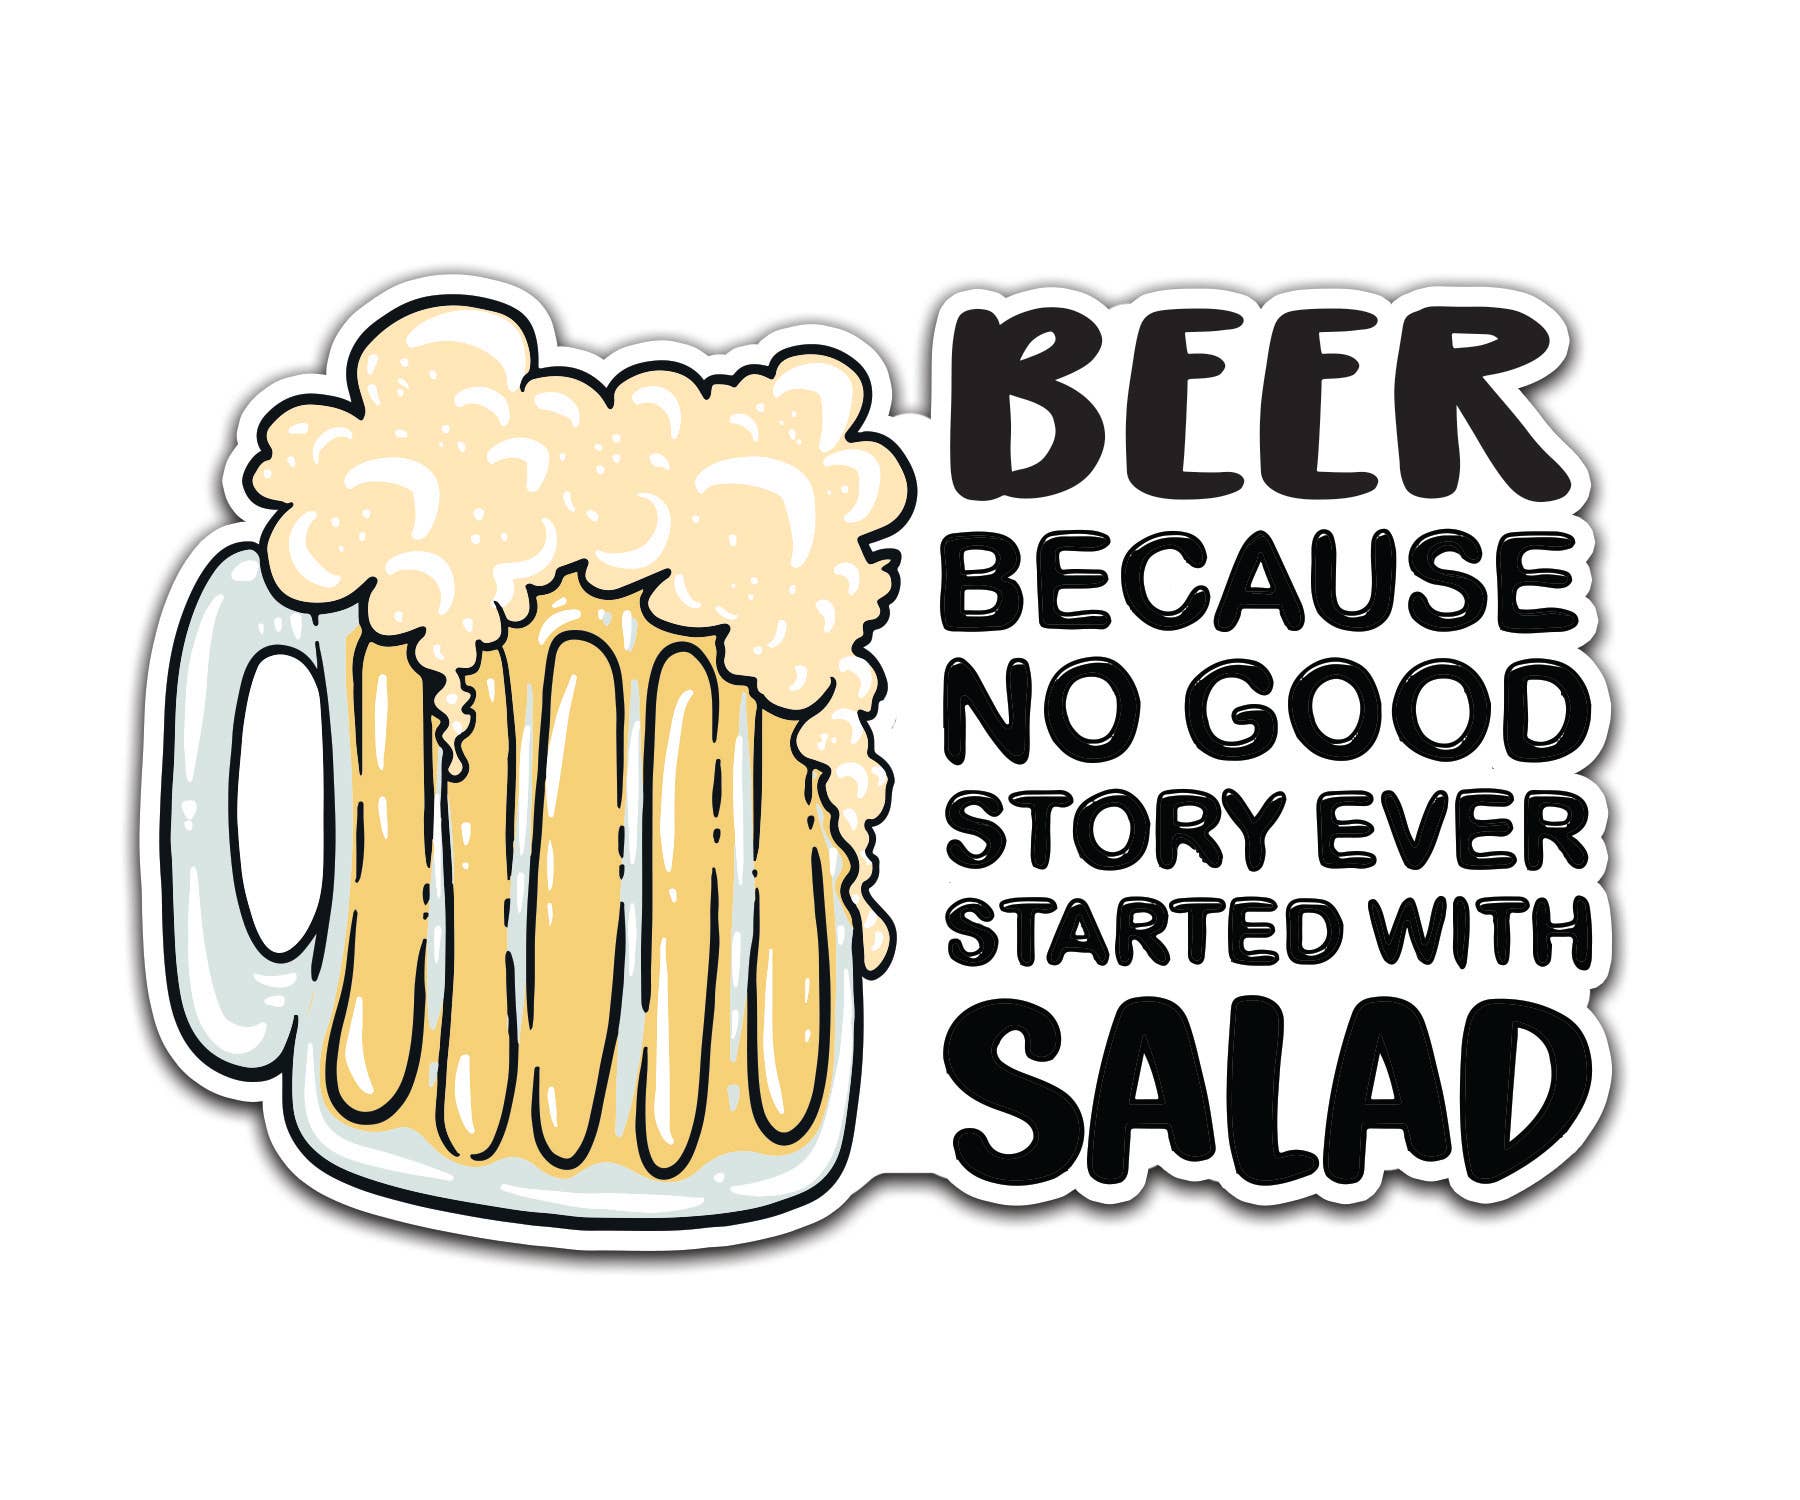 Beer not Salad - Vinyl Sticker - Torched Products